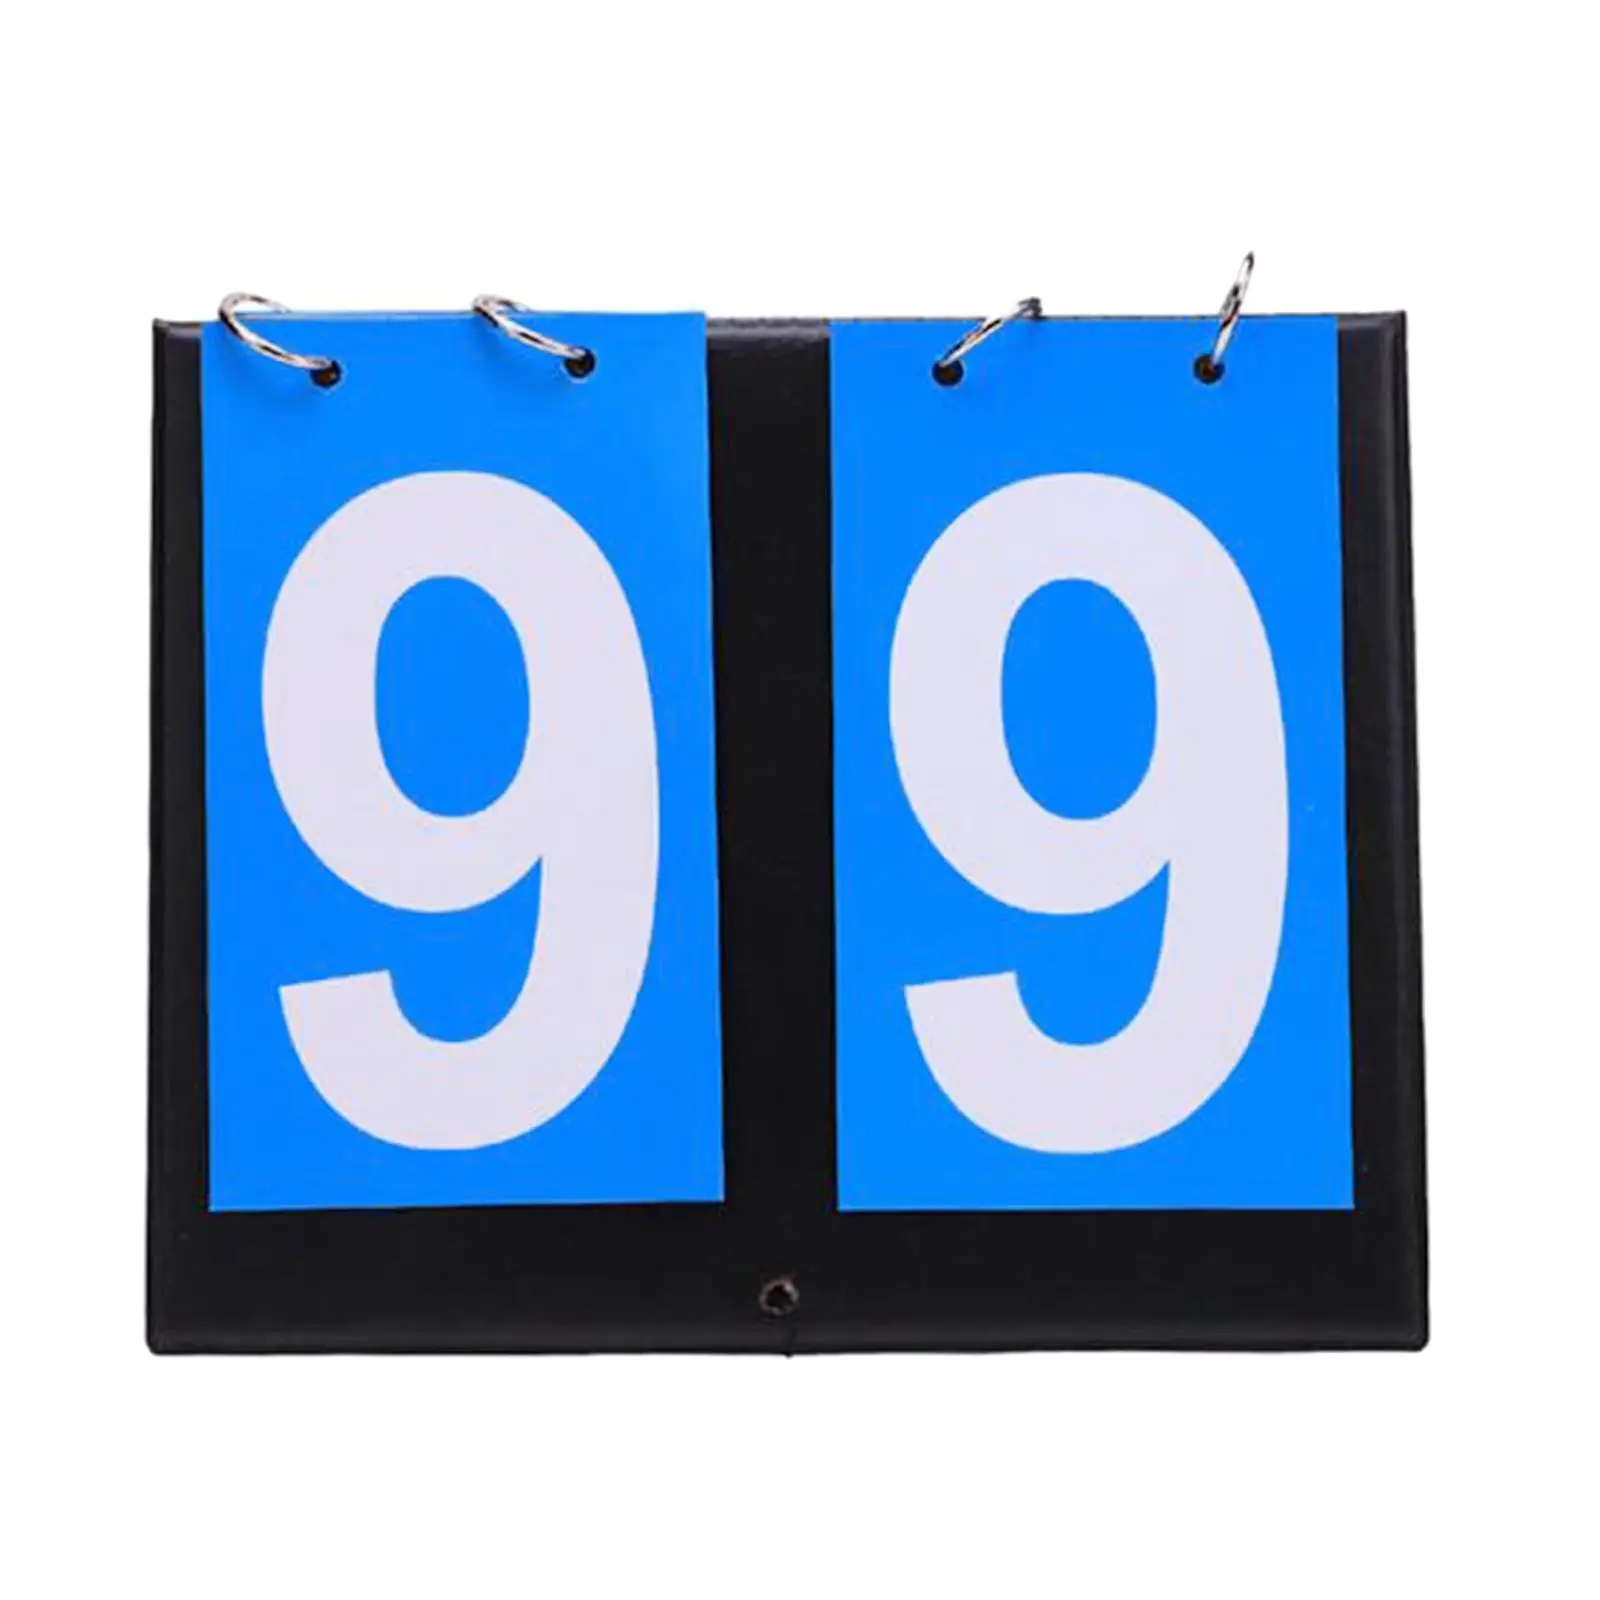 Multipurpose Table Scoreboard Flips up Detachable 2 digits Score Keeper for Basketball Indoor Sports Team Games Competition Ball